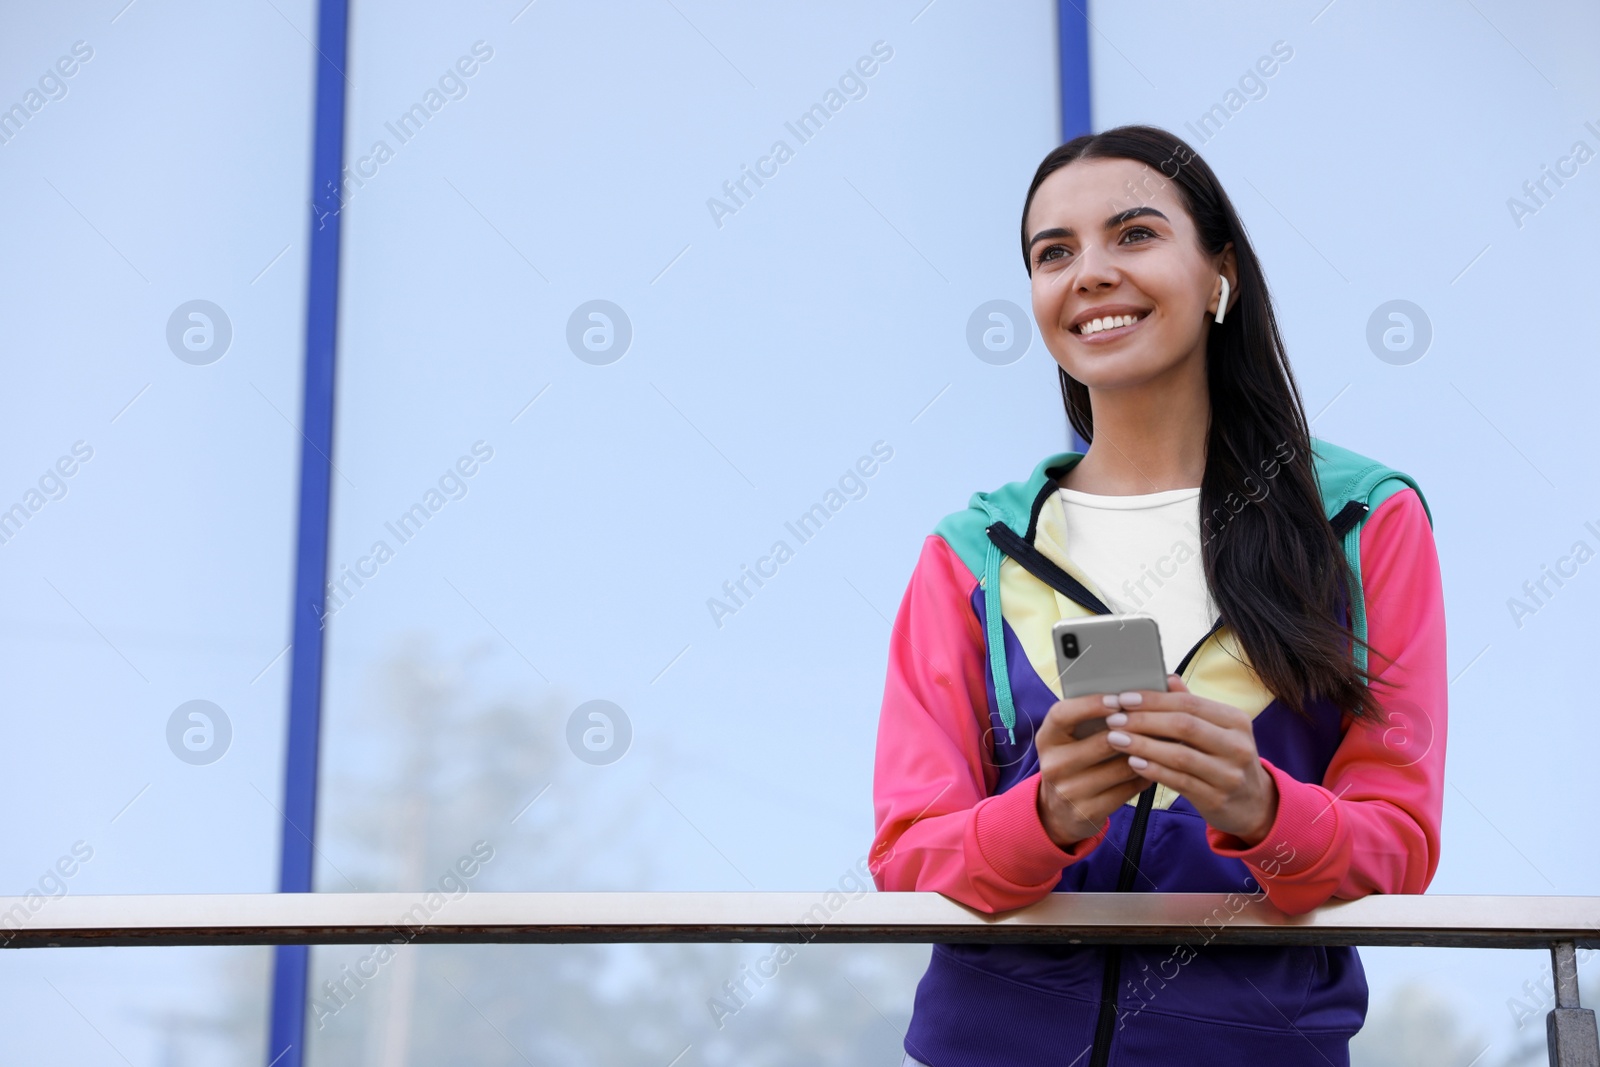 Photo of Young sportswoman with wireless earphones and smartphone on city street